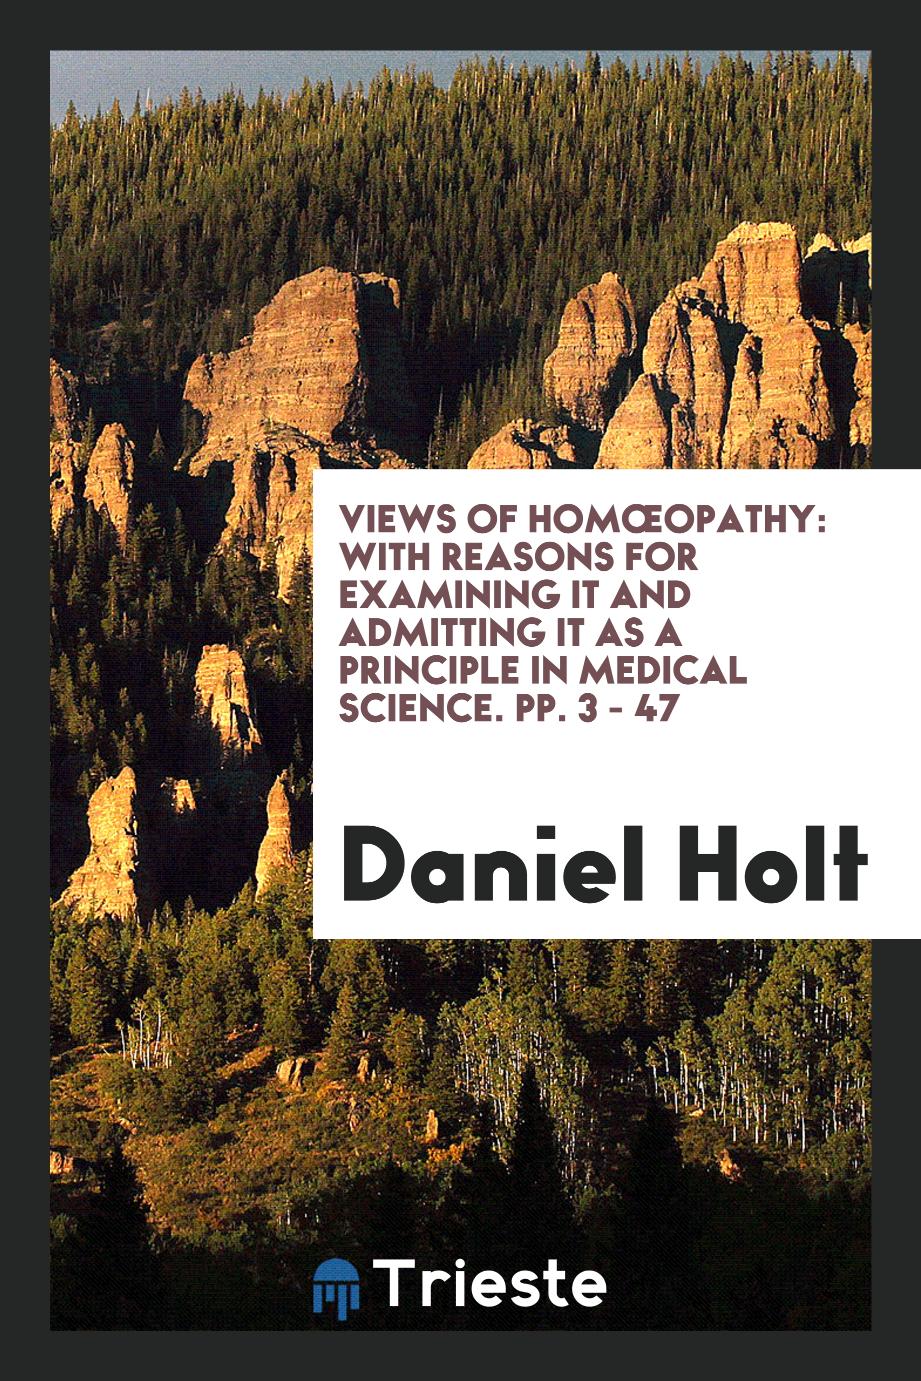 Views of Homœopathy: With Reasons for Examining it and Admitting it as a Principle in Medical Science. pp. 3 - 47